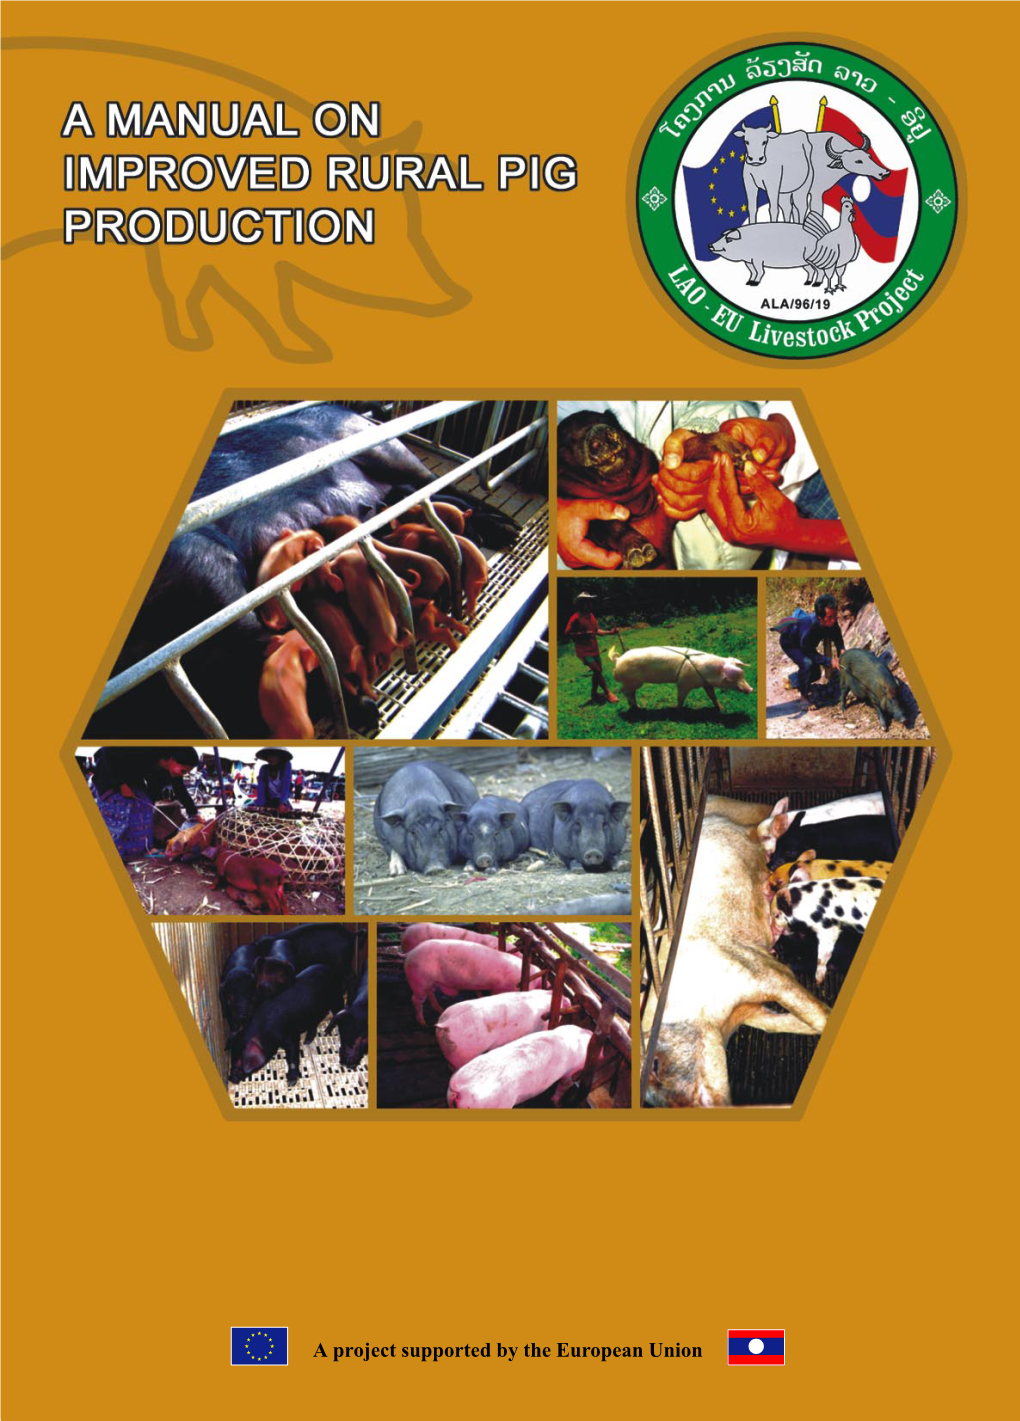 A Manual on Improved Rural Pig Production